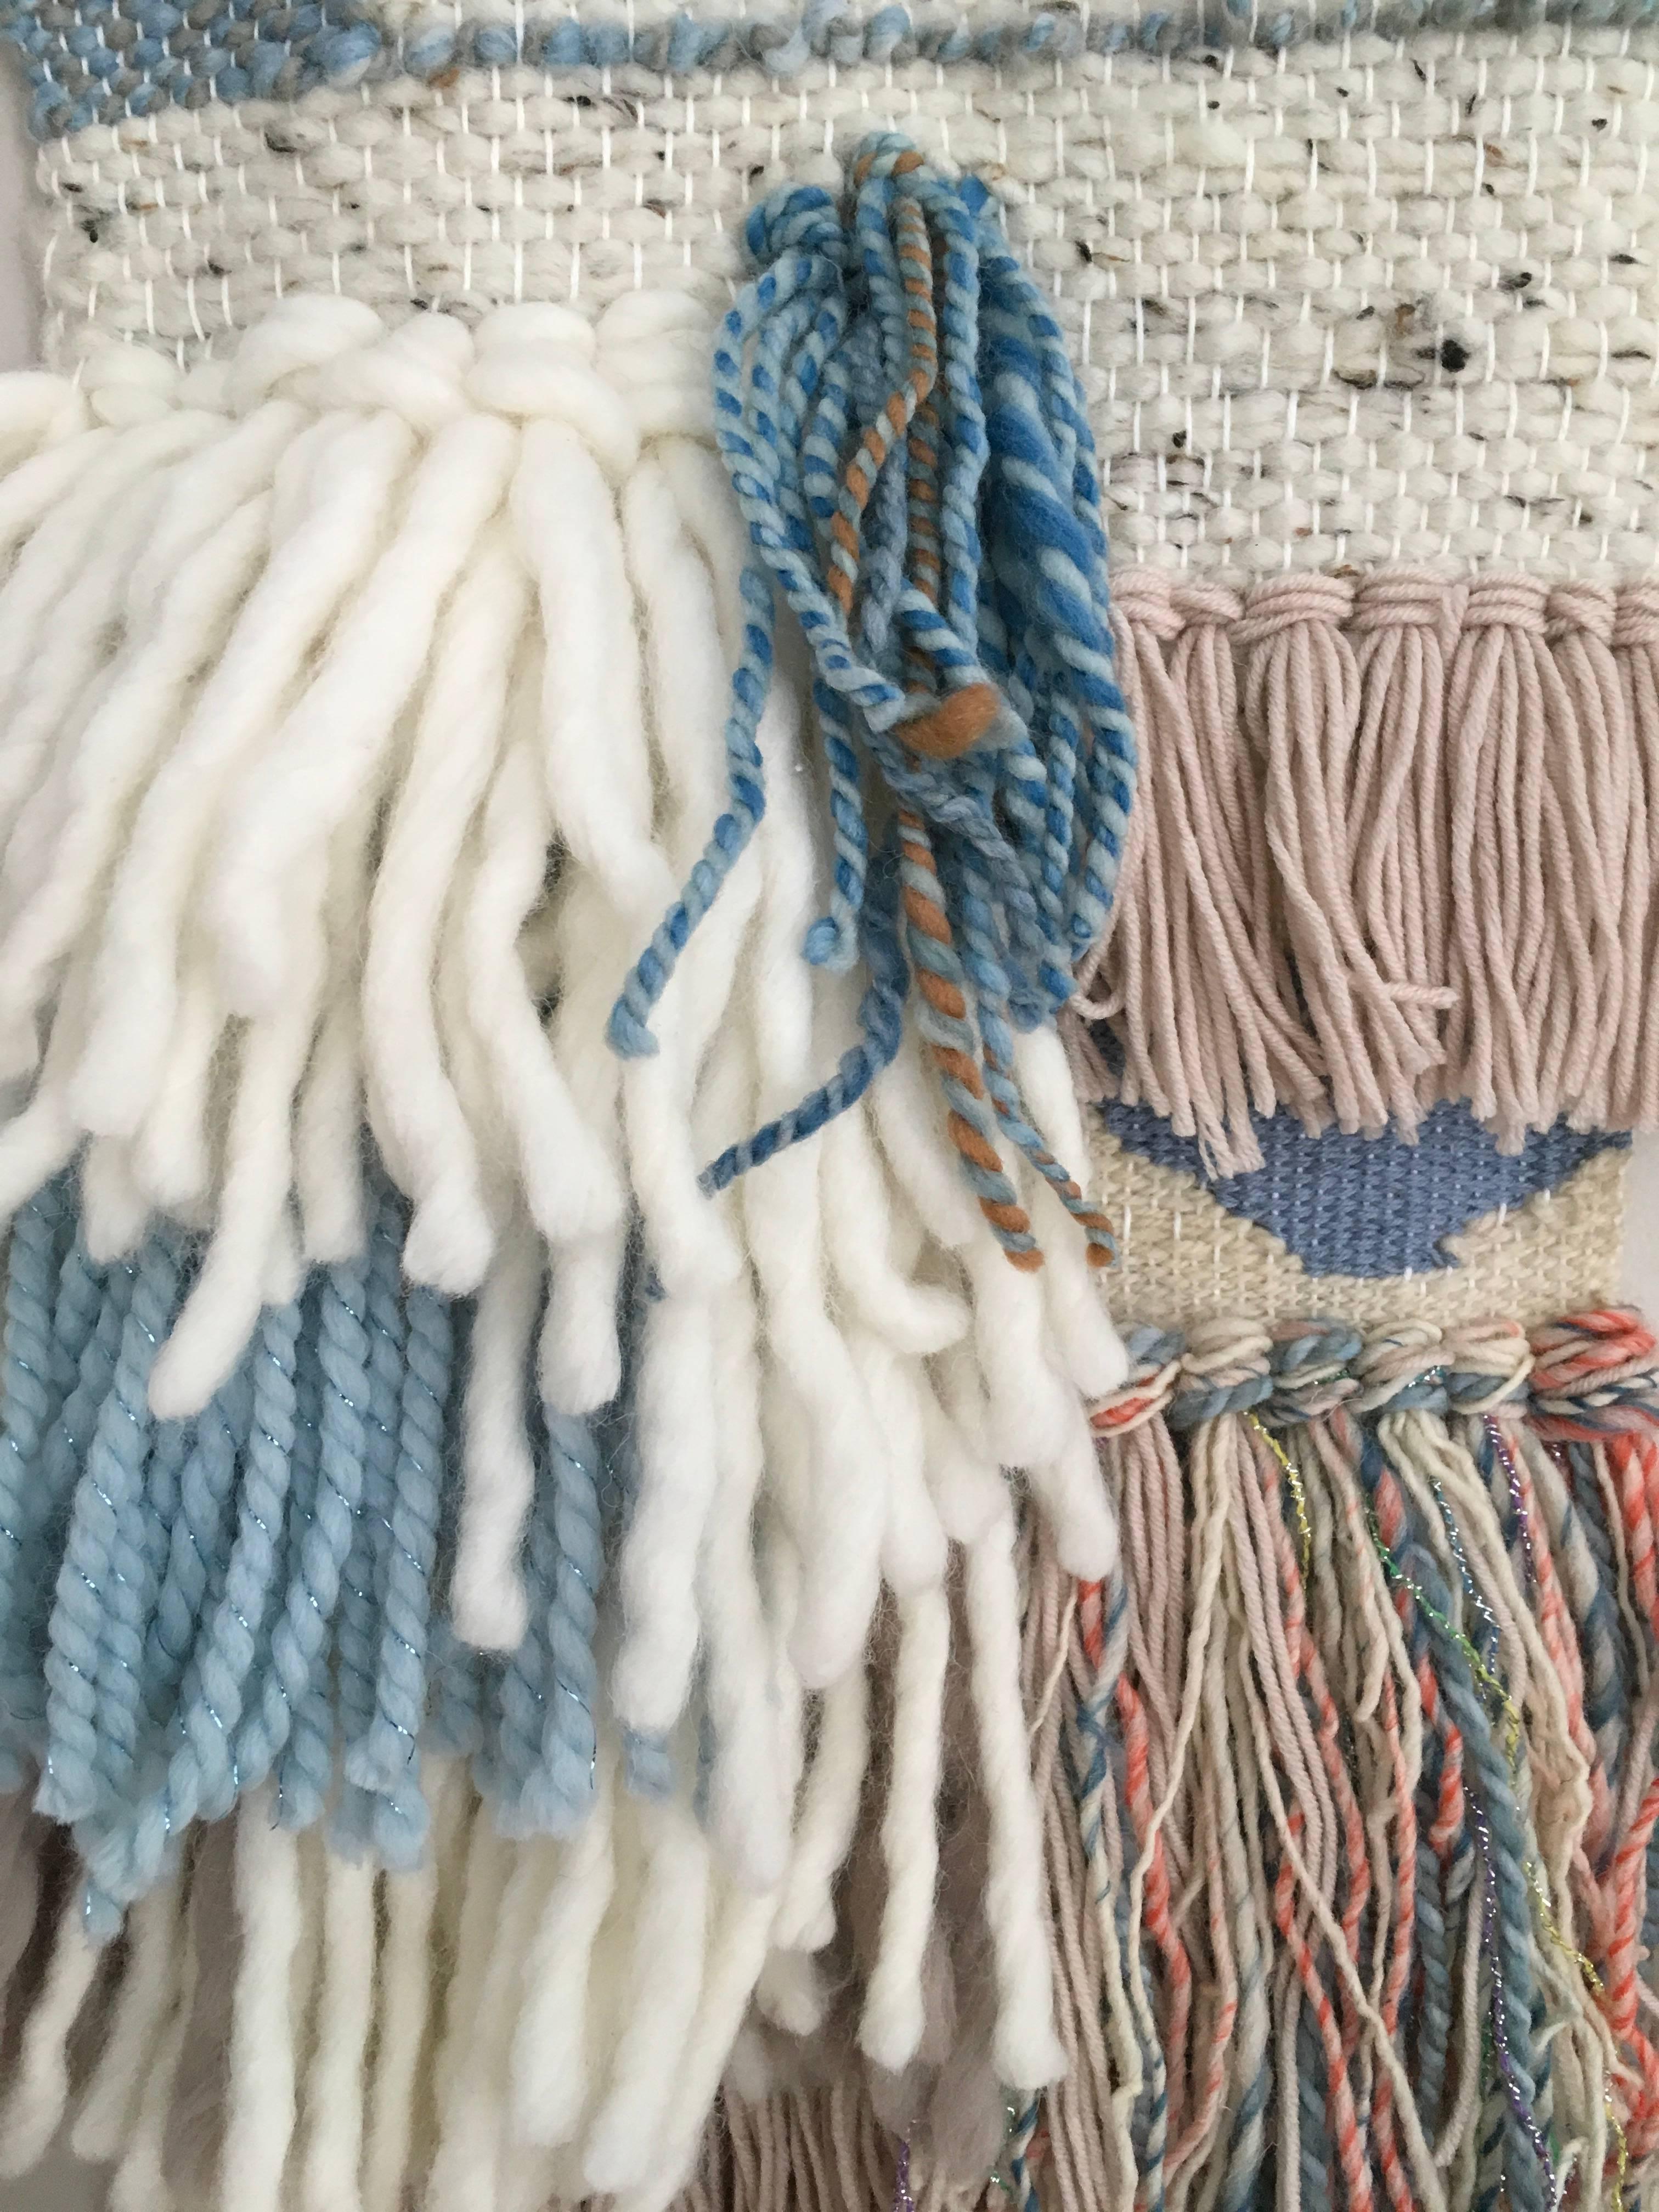 Cotton, Merino and Alpaca wool hand weaving, fiber art, yarn, wall sculpture, wall hanging, chic, interior design, decor, decoration, interior decor, home ready, ready to hang


ARTIST BIO:
Dolores Tema studied design at Parsons School of Design in